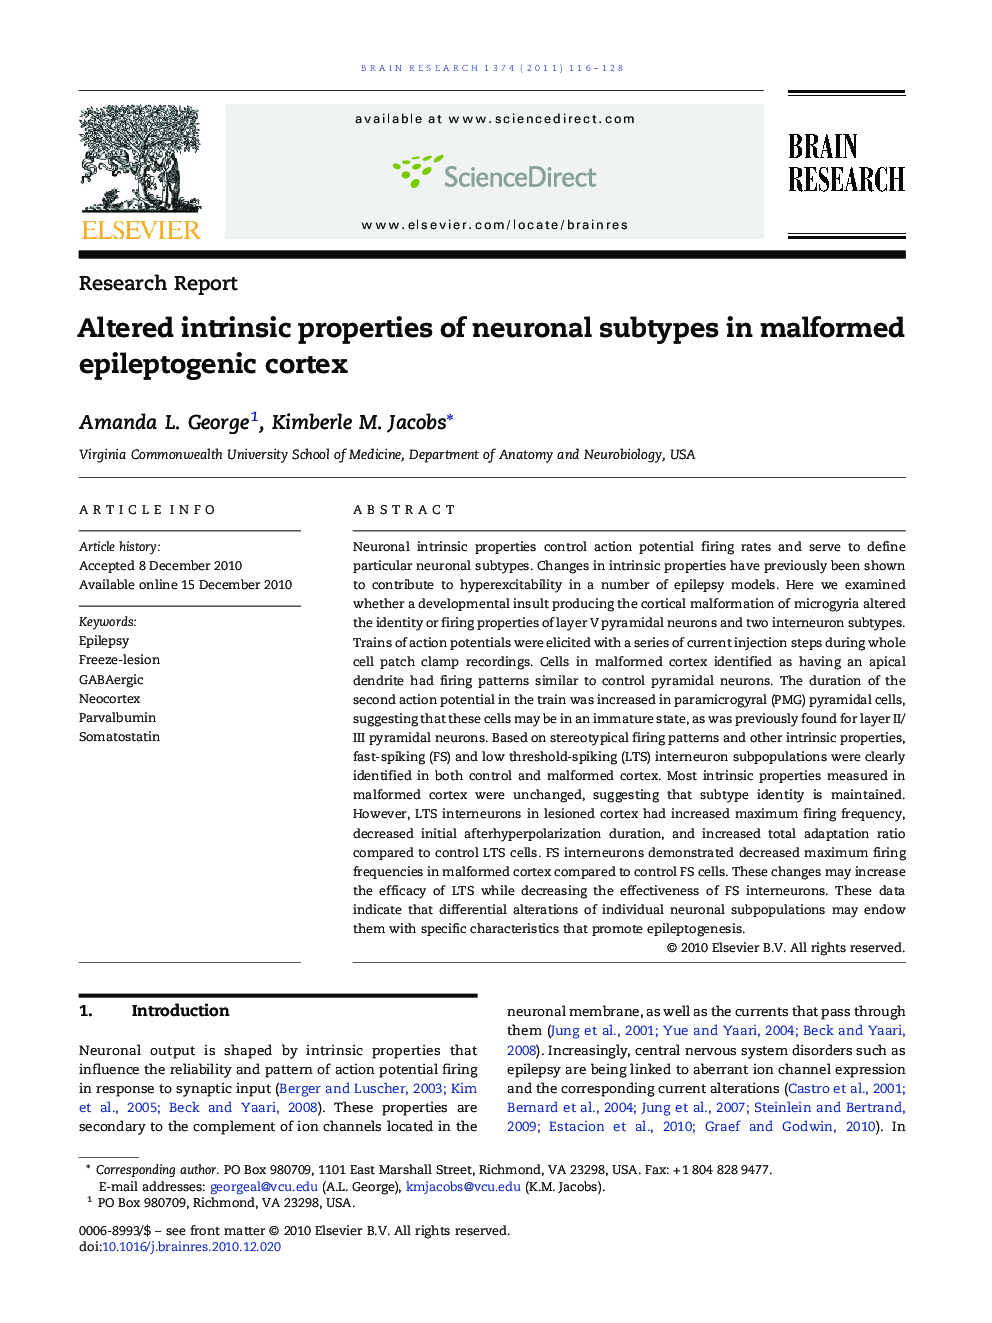 Research ReportAltered intrinsic properties of neuronal subtypes in malformed epileptogenic cortex